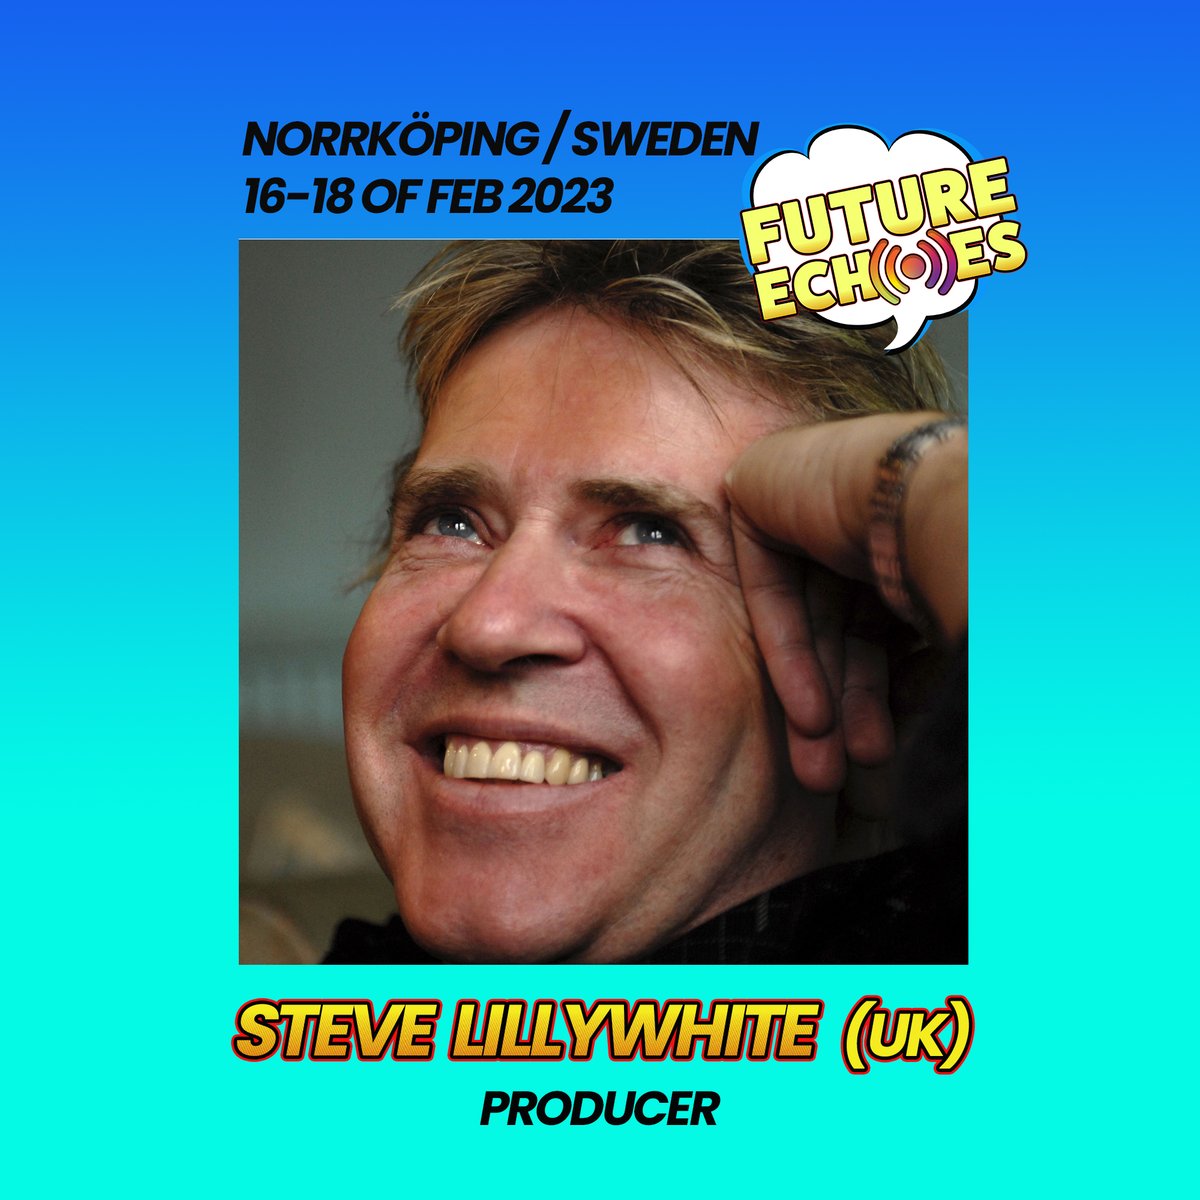 Steve Lillywhite is coming to Future Echoes! Steve Lillywhite has produced some of our biggest hits ever. Like a Fairytale of New York that is one of the top ten most played Christmas songs. Sunday Bloody Sunday and New Year’s day with U2. #futureechoes #visitnorrköping